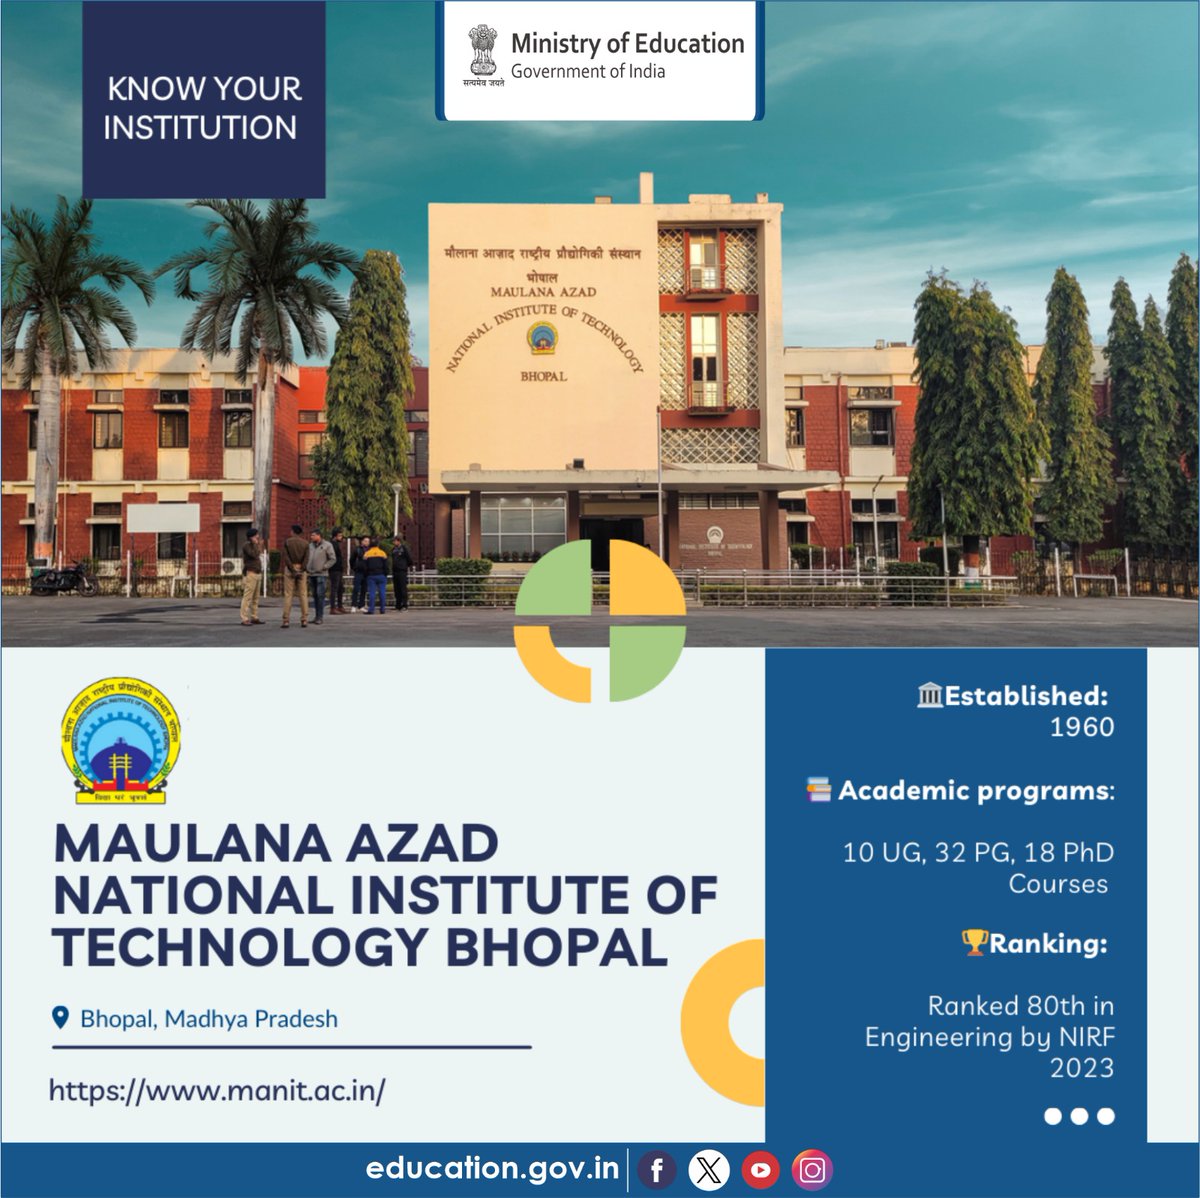 Know about the HEIs of India! Maulana Azad National Institute of Technology (MANIT) Bhopal was established in 1960, as one of the pioneering Regional Engineering Colleges (RECs). Over time, it became a top-tier institution, gaining recognition as an Institute of National